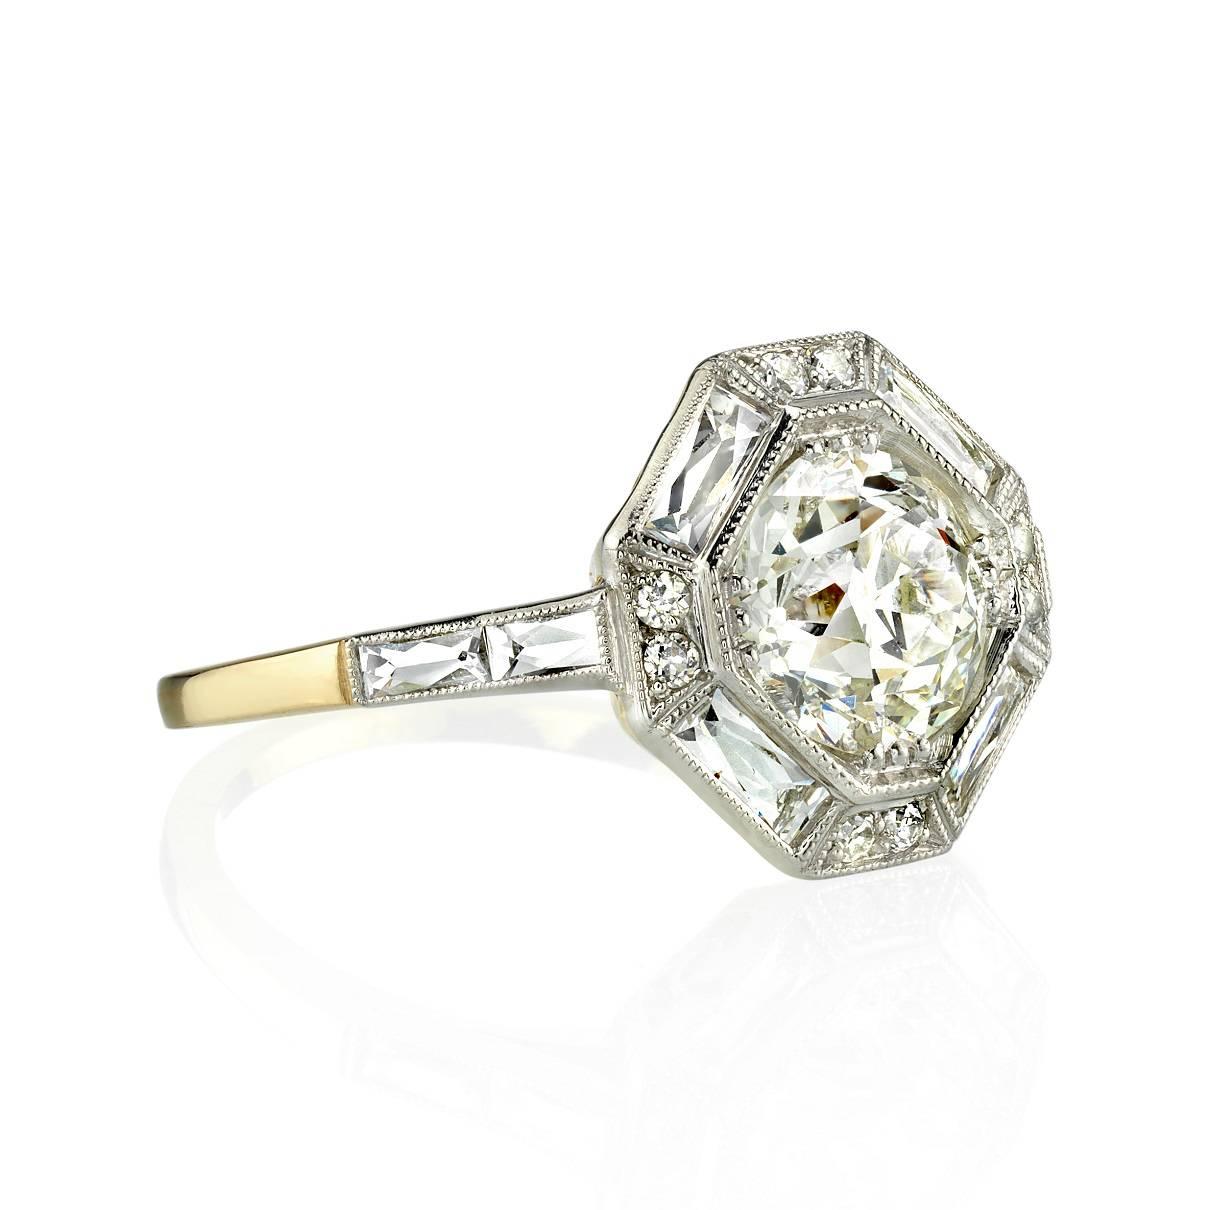 1.49ct L/VS2 GIA certified old Mine cut diamond set in a handcrafted 18K yellow gold and platinum mounting. The Art deco inspired design features an octagonal halo with French cut and old European cut diamond accents. The ring is currently a size 6.